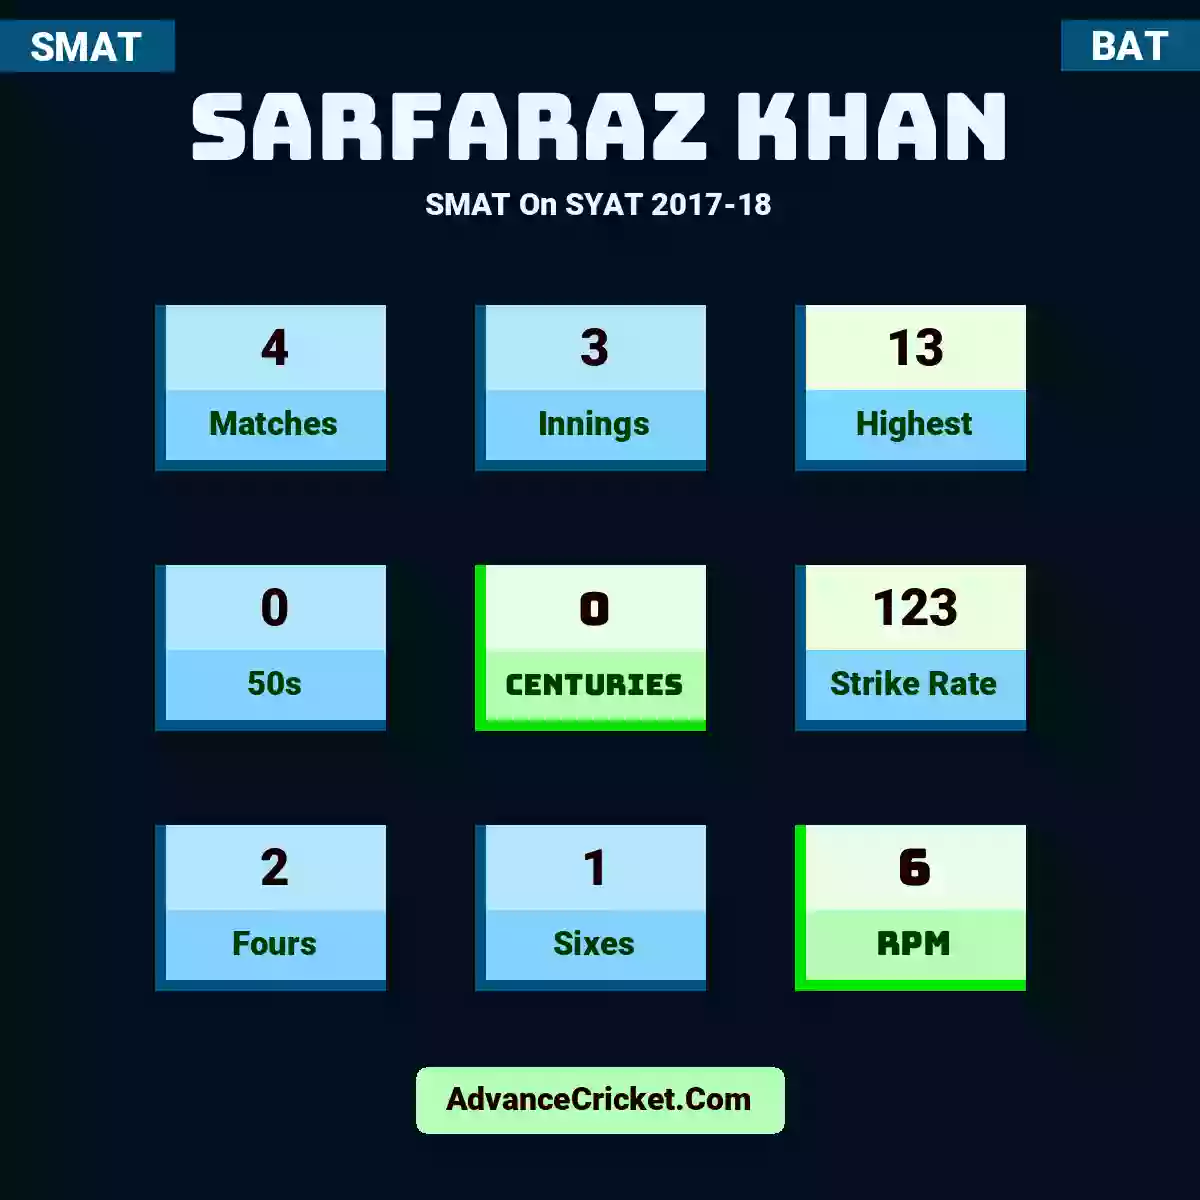 Sarfaraz Khan SMAT  On SYAT 2017-18, Sarfaraz Khan played 4 matches, scored 13 runs as highest, 0 half-centuries, and 0 centuries, with a strike rate of 123. S.Khan hit 2 fours and 1 sixes, with an RPM of 6.